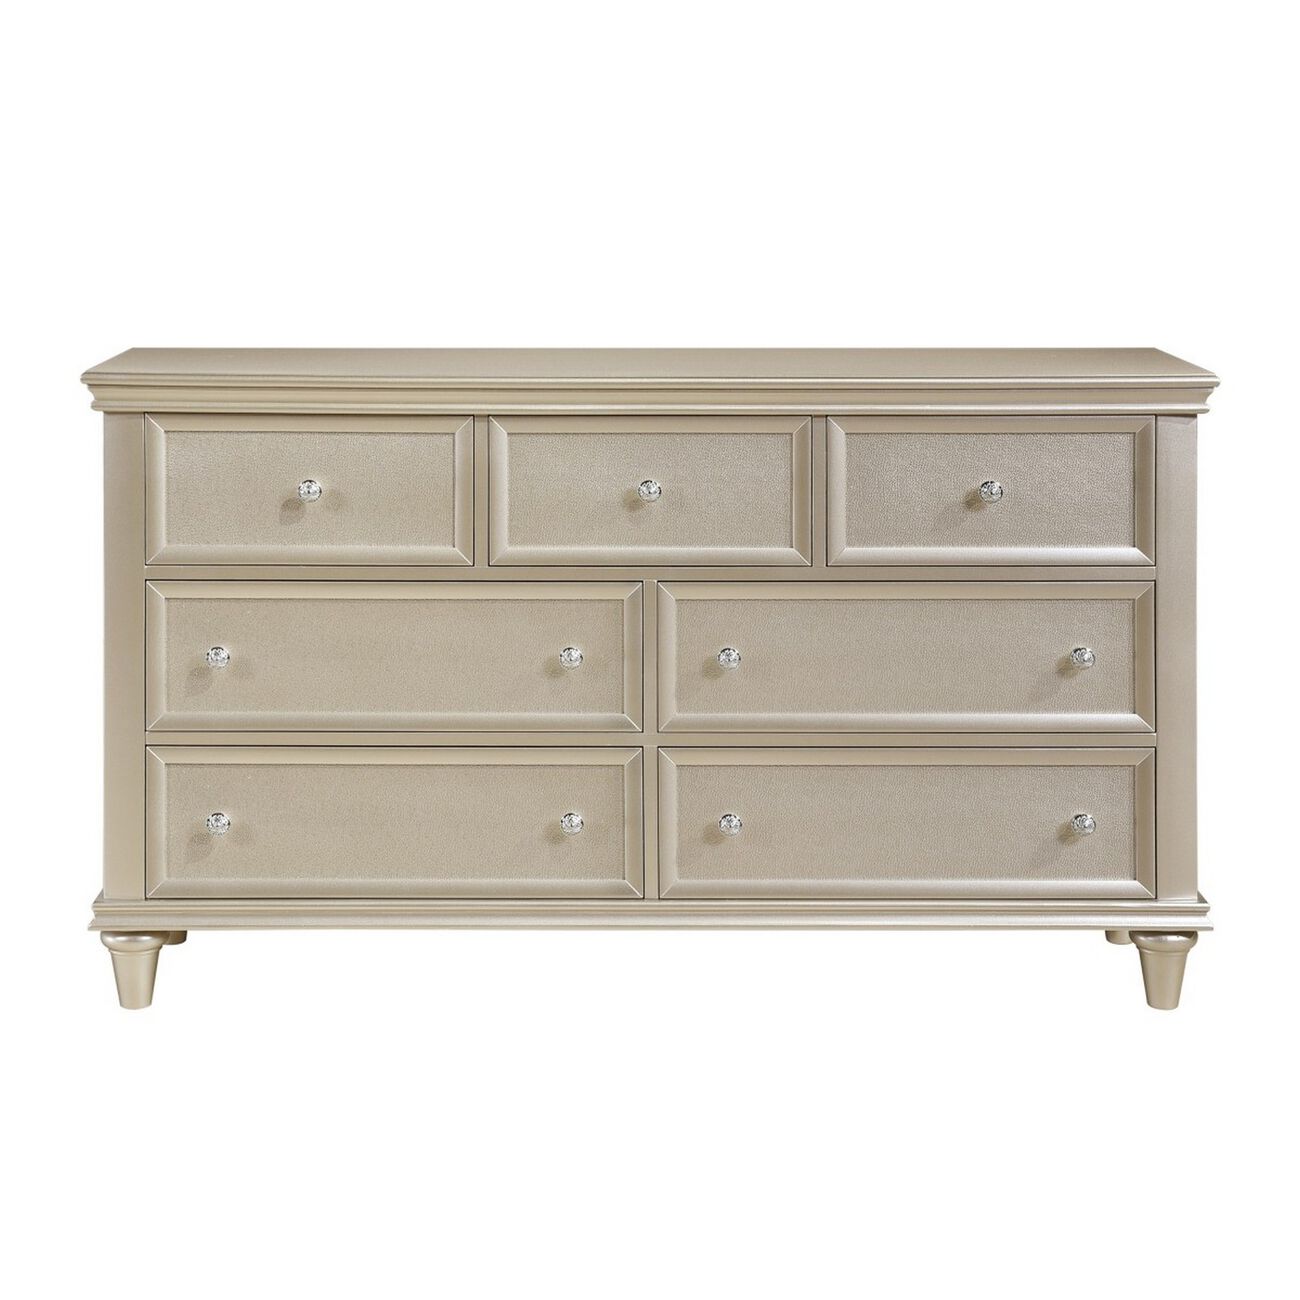 7 Drawer Wooden Dresser with Faux Crystal Knobs, Champagne Silver